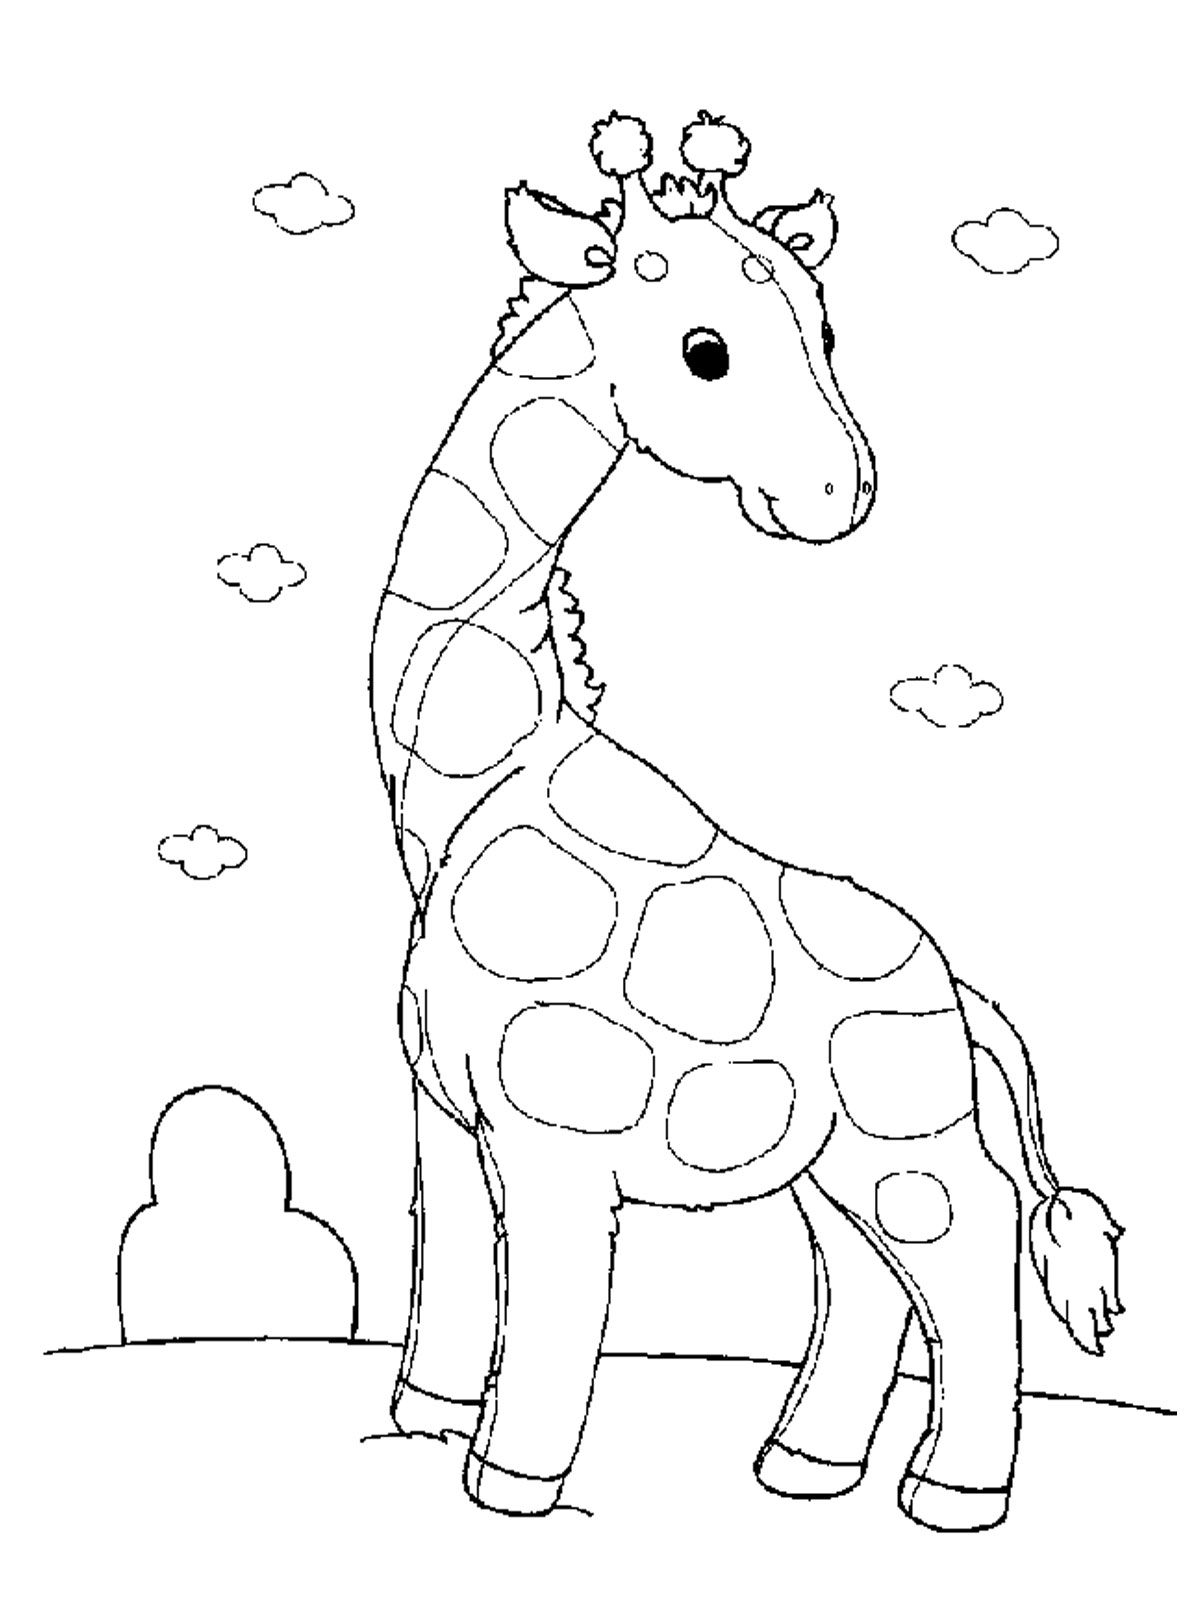 Animal Coloring Pages (7) - Coloringkids.org